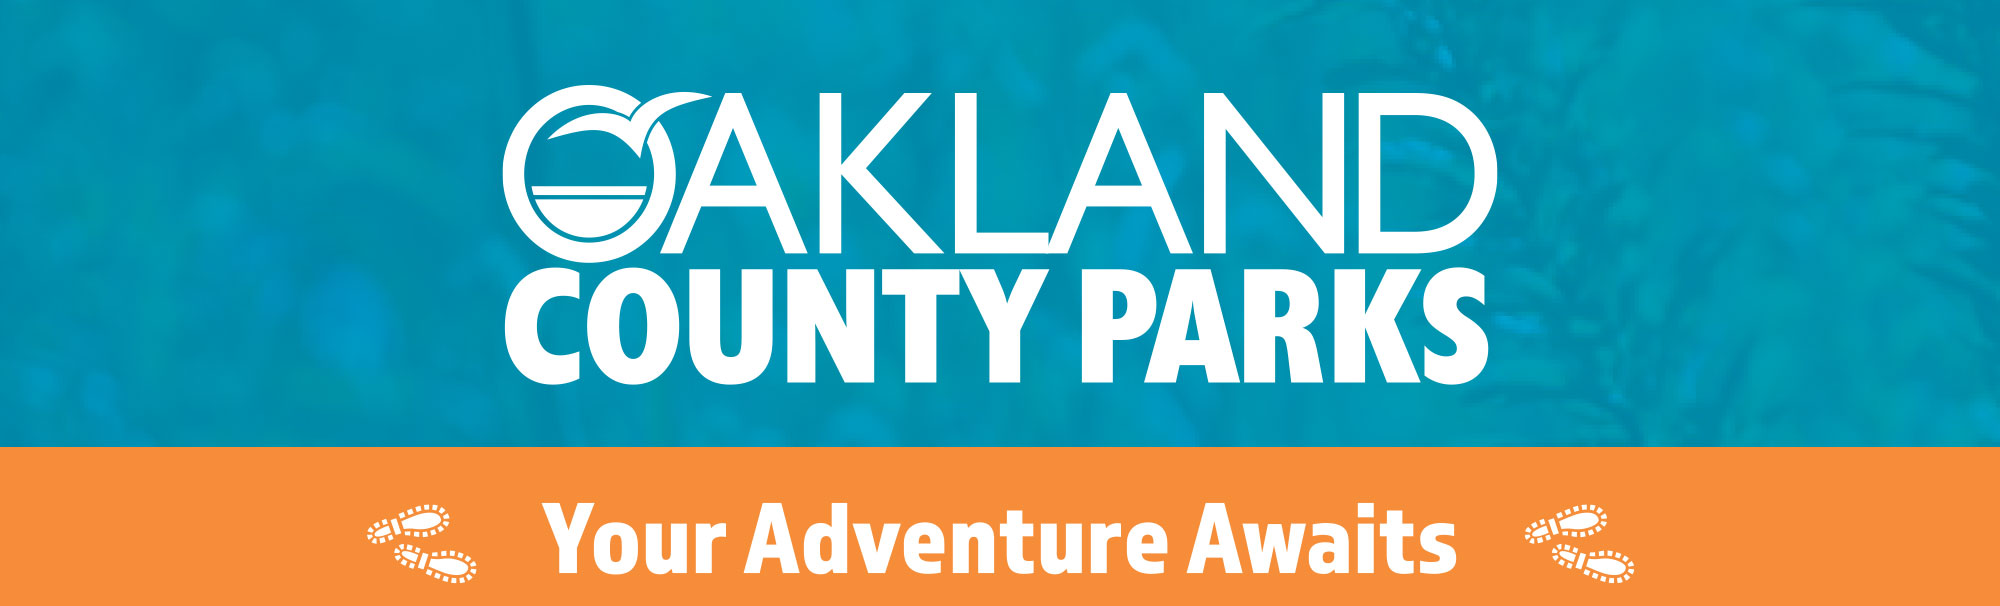 Oakland county parks banner graphic image